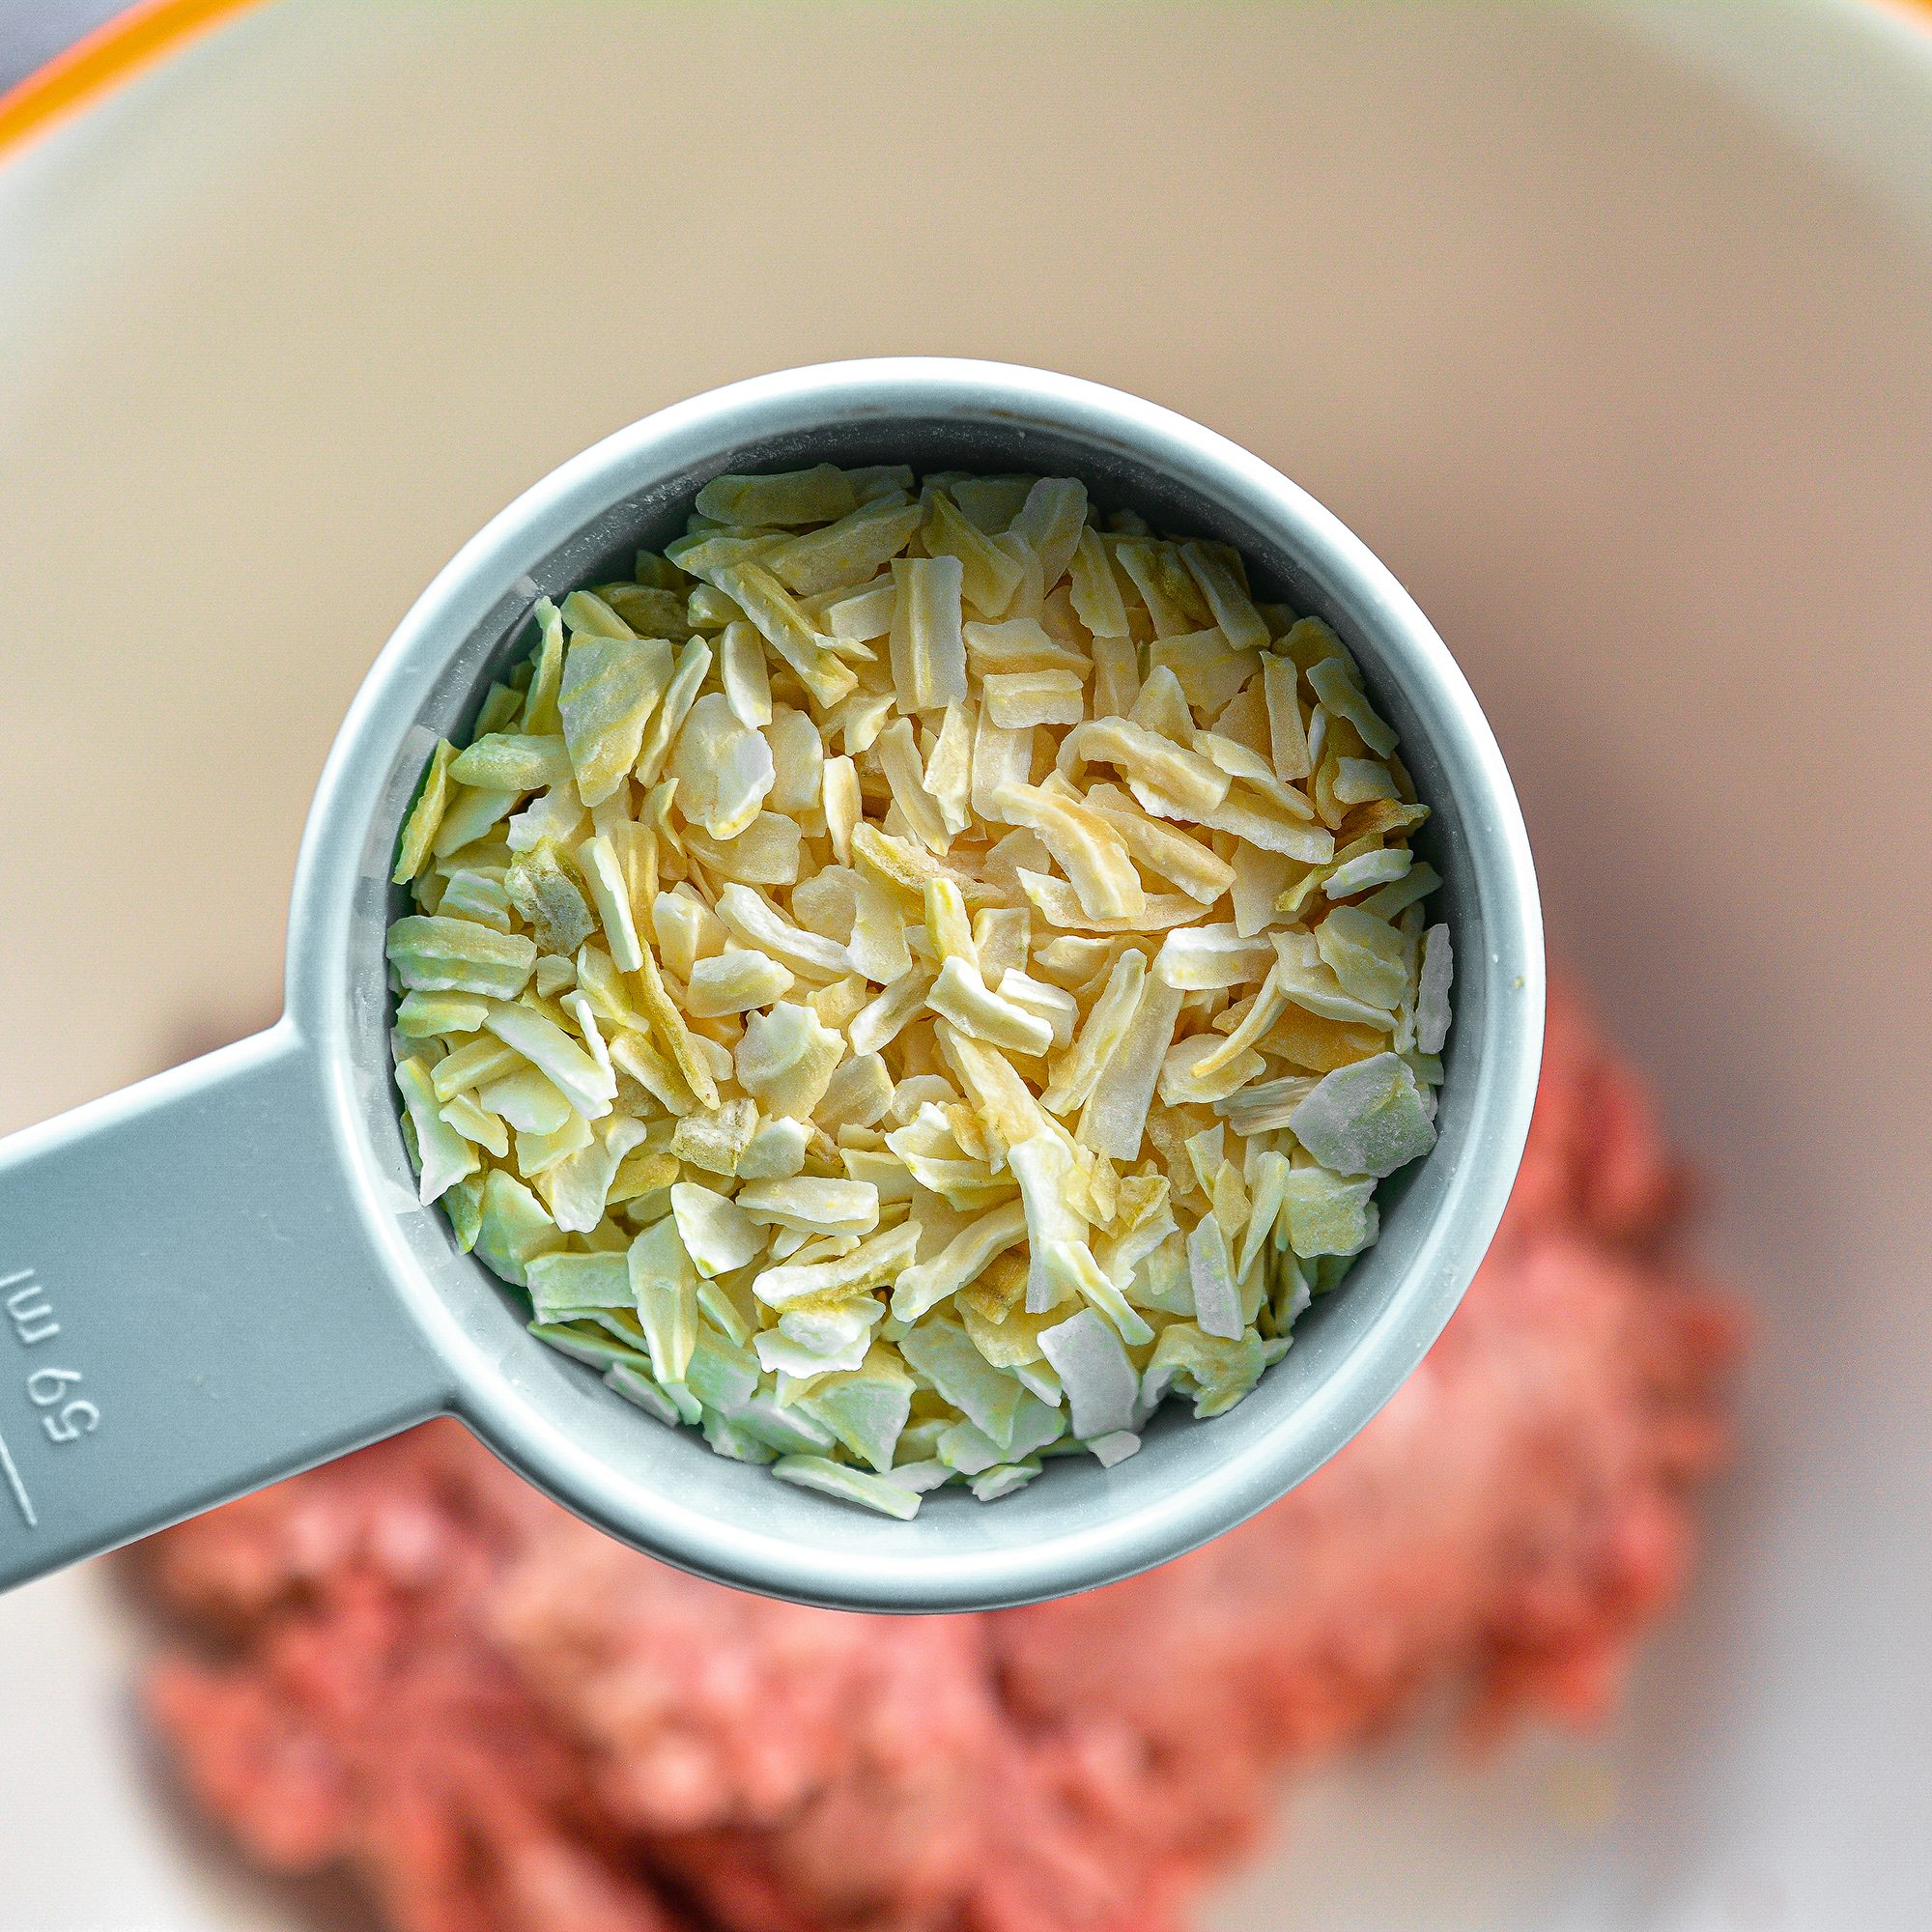 In a smaller bowl, combine the ground beef, minced onion, egg, bread crumbs, and salt and pepper to taste.